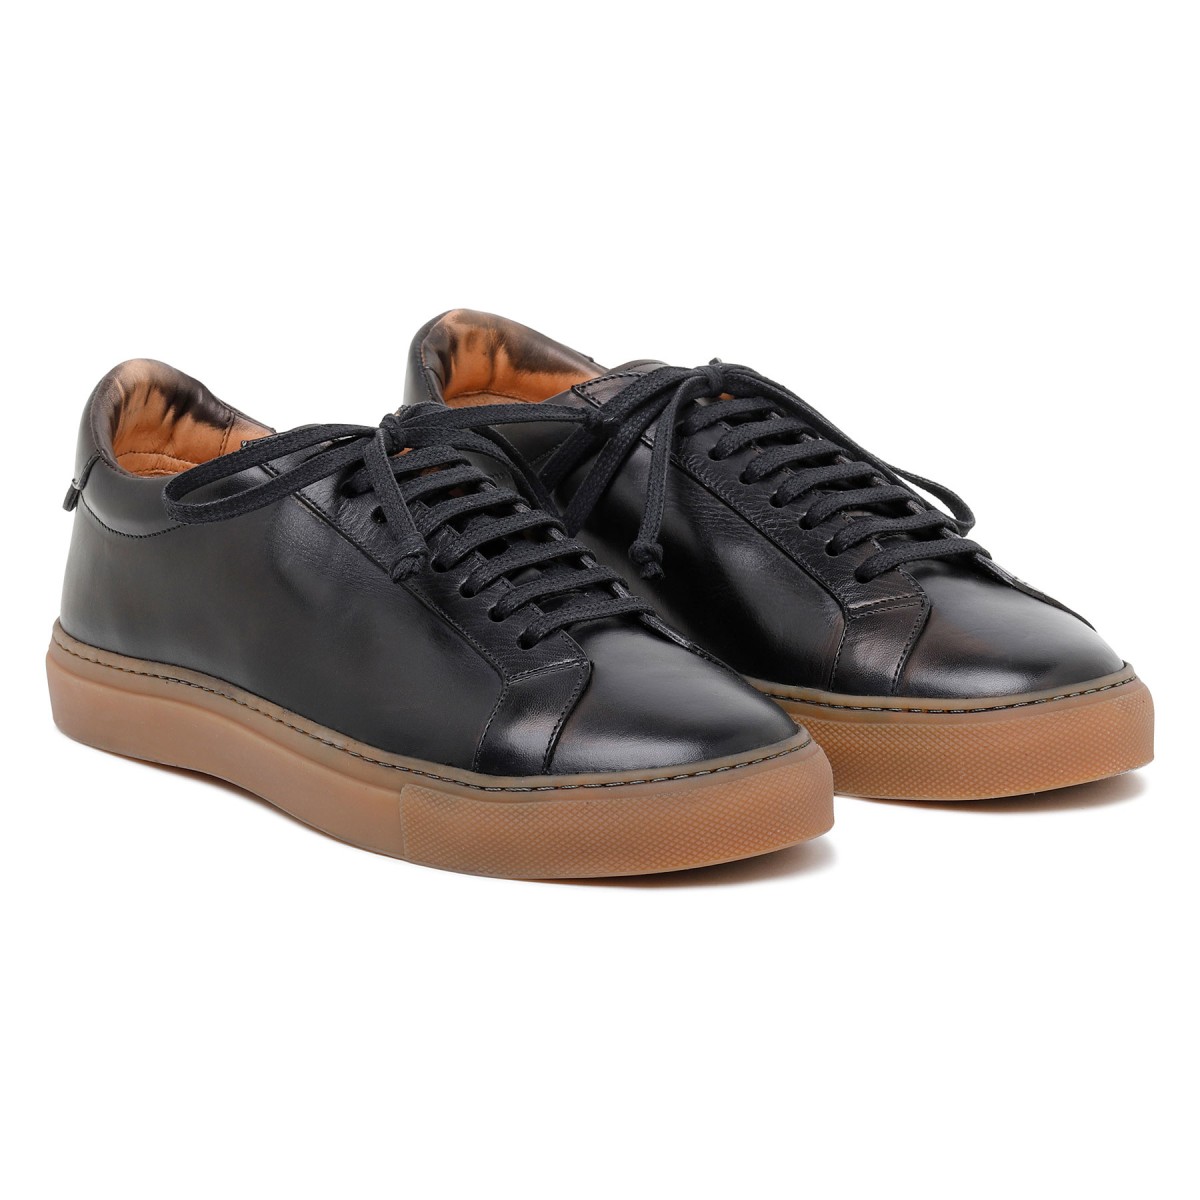 Romilly black leather sneakers